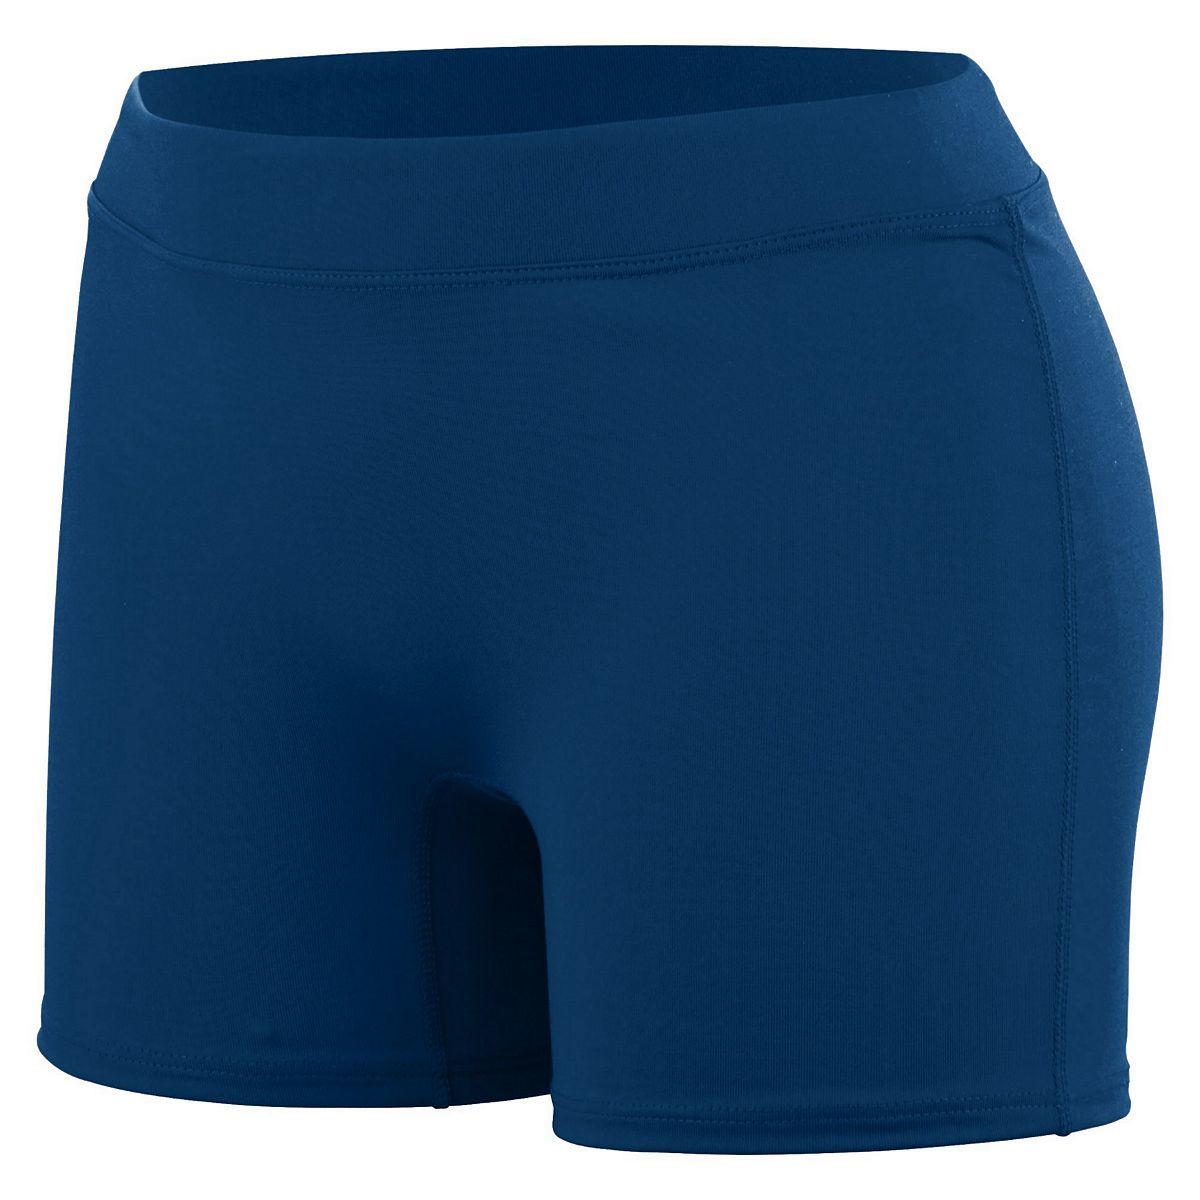 Girls Knock Out Shorts - 345583